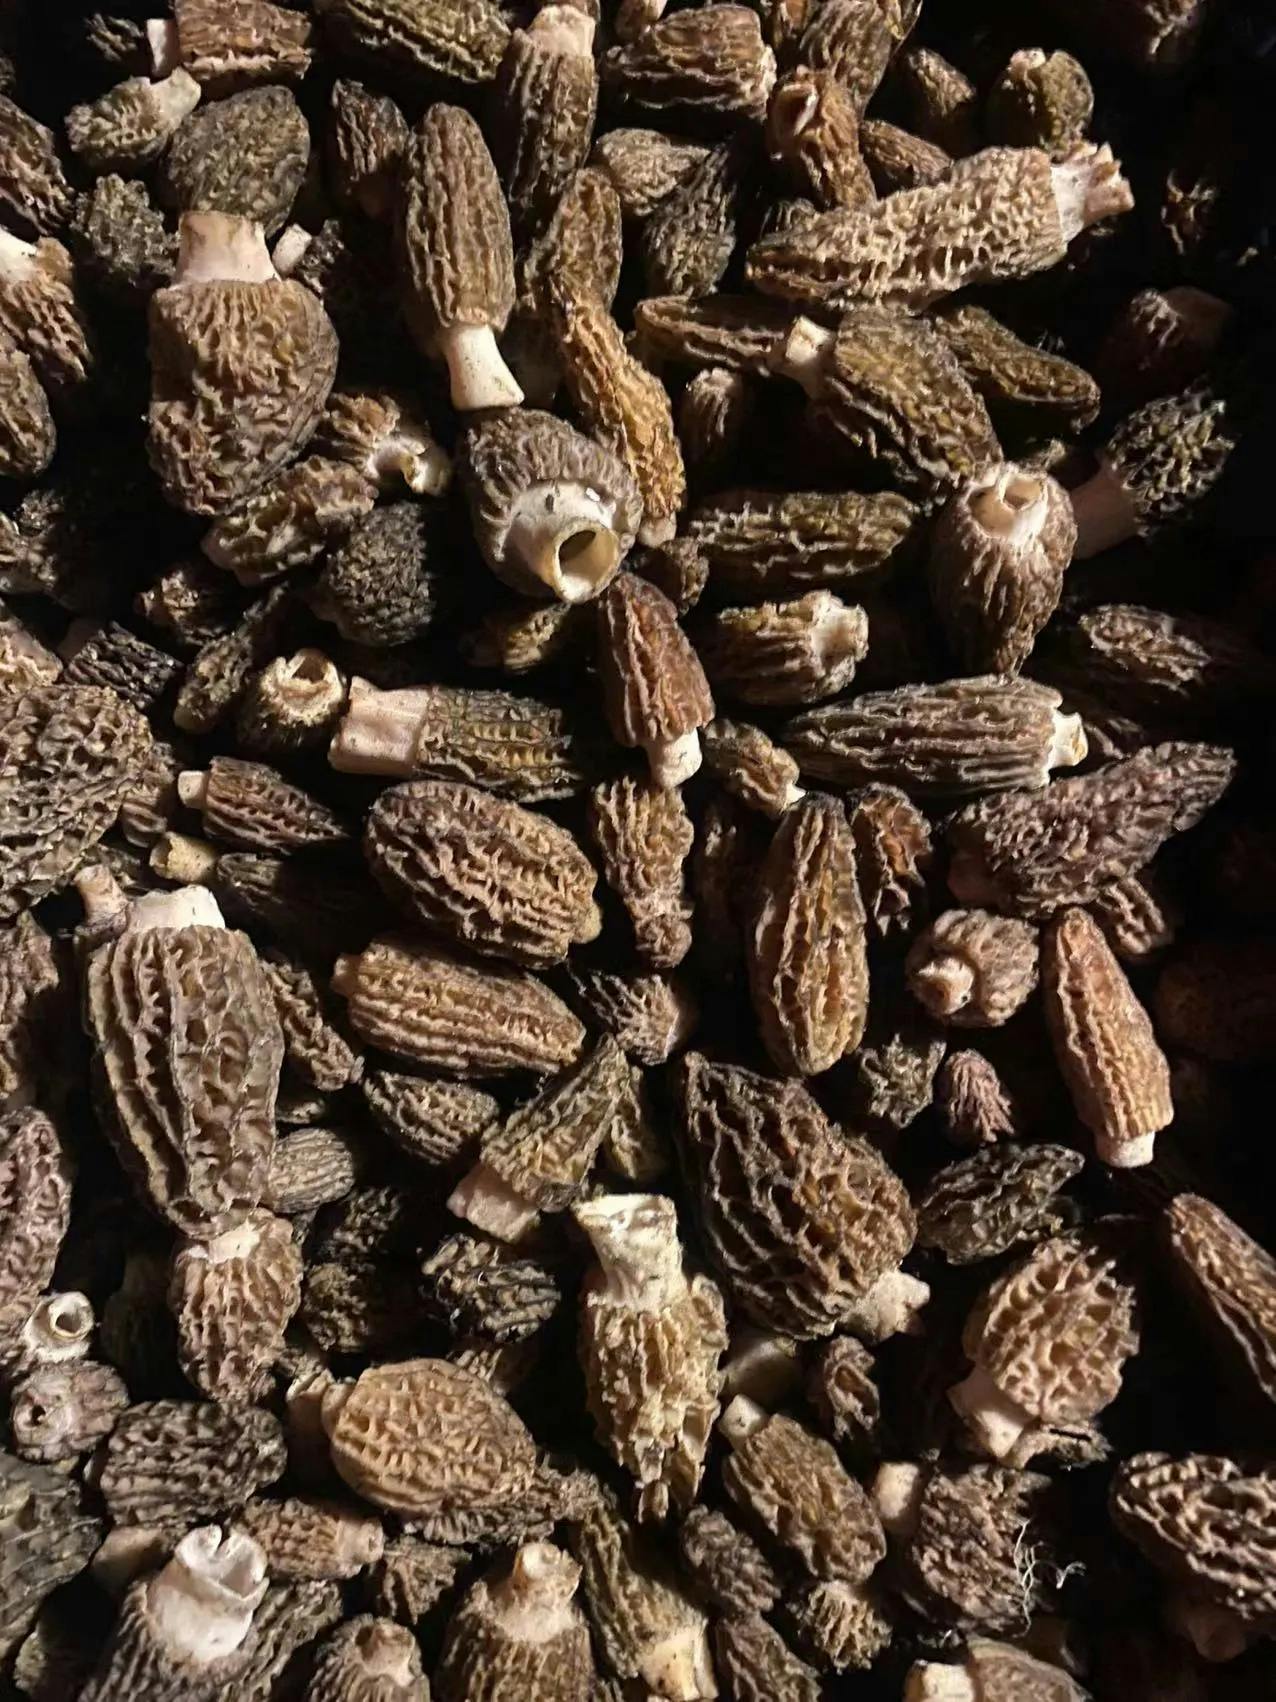 The Art of Cultivating Mysteries: How to Grow Black Morel Mushrooms